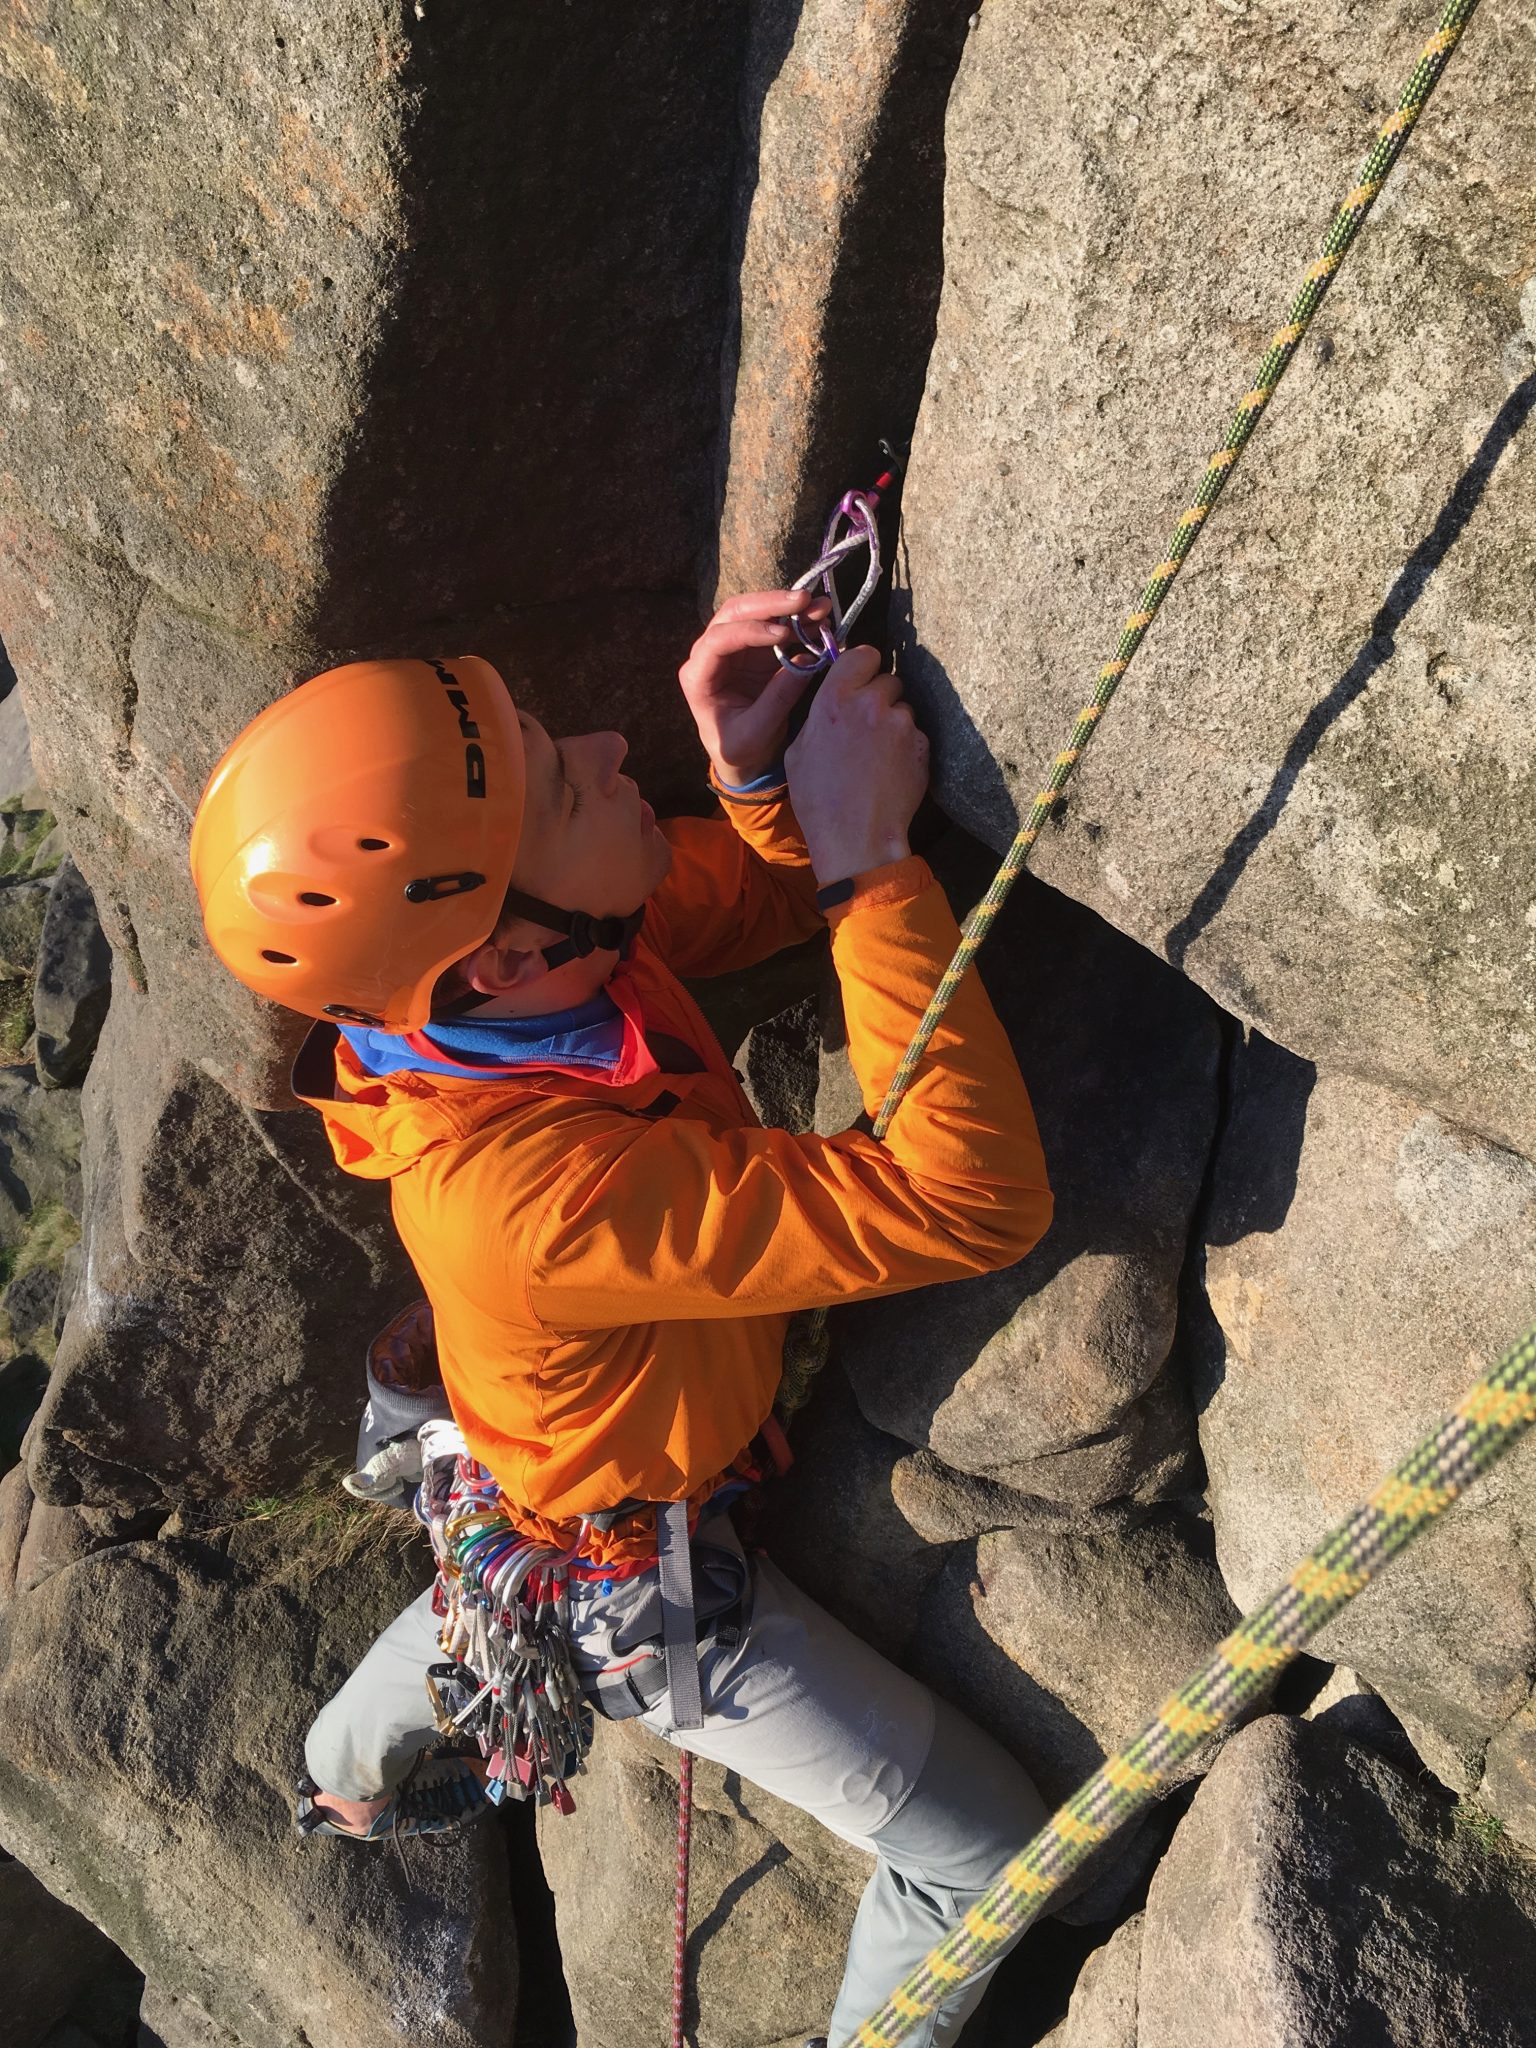 A rock climber removes equipment during a rock climbing course in the Peak District